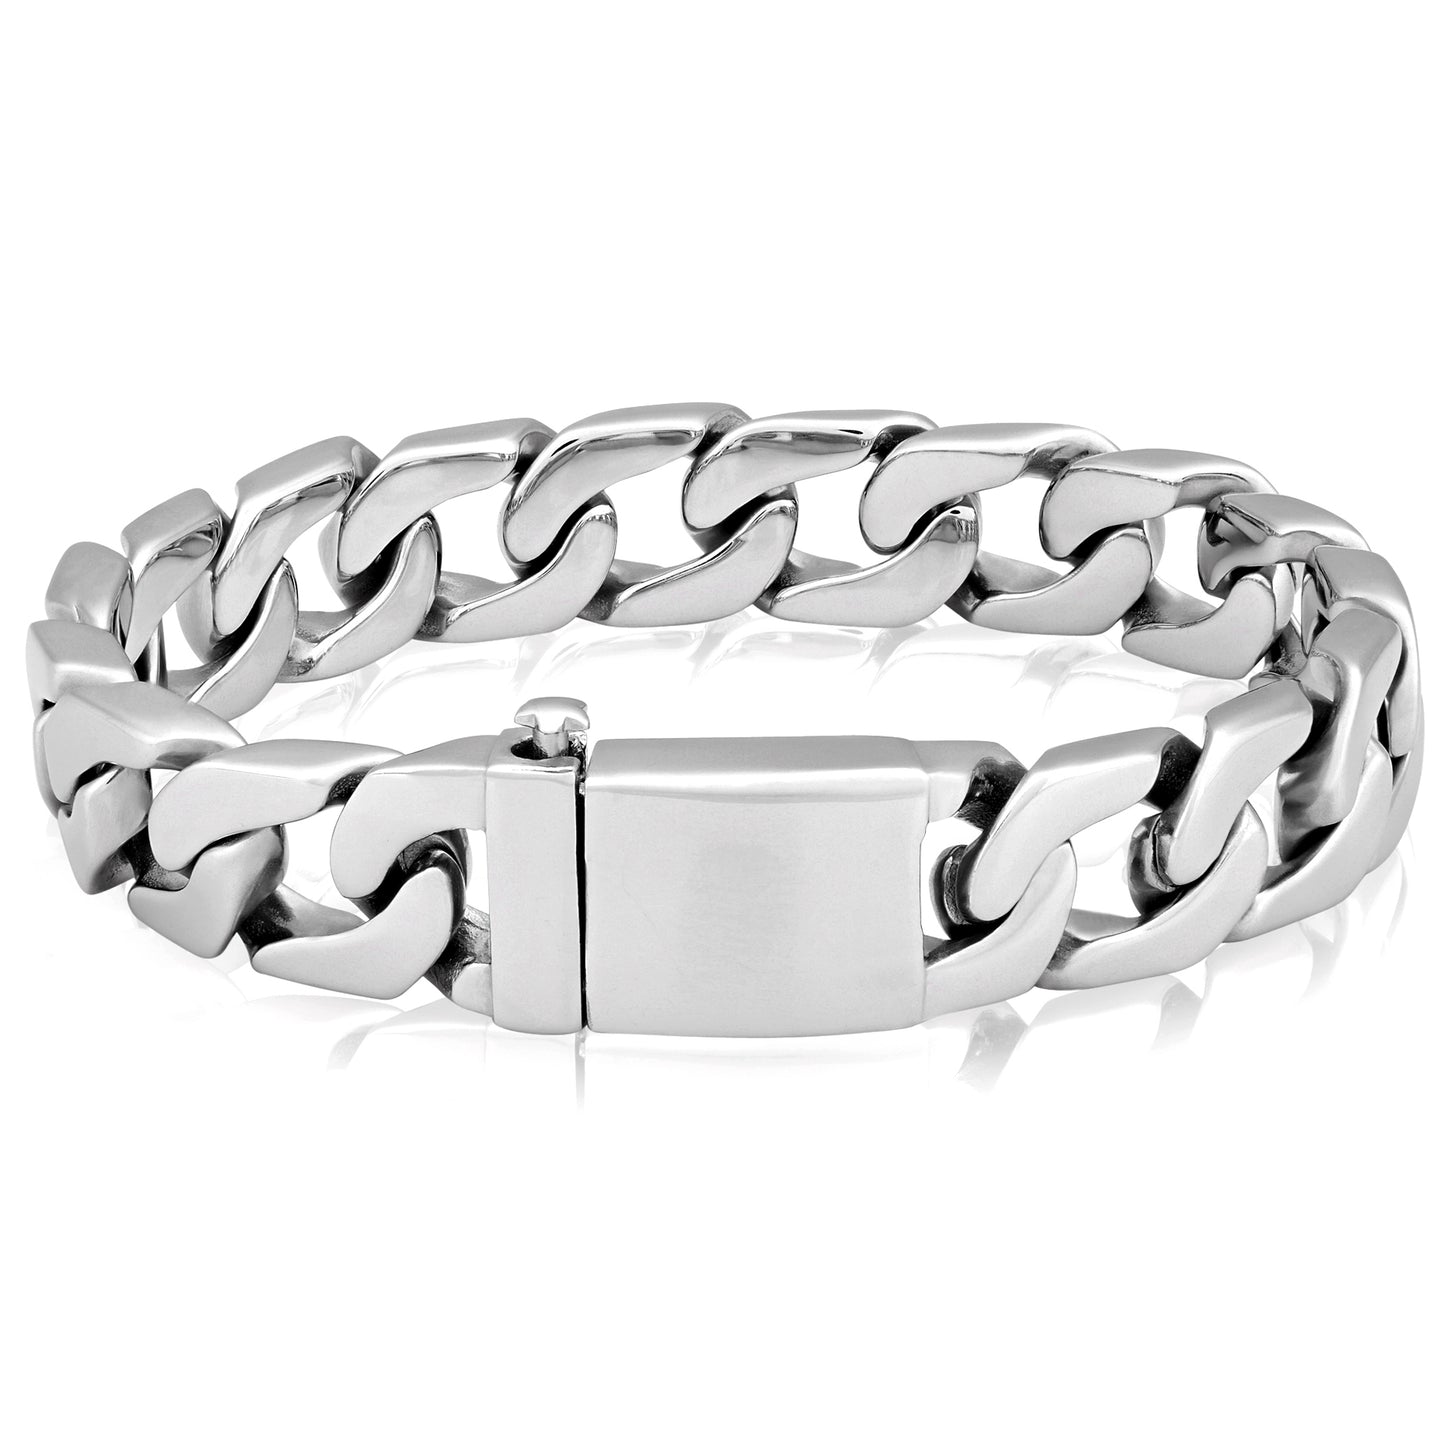 Men's Stainless Steel Polished Box Clasp Curb Chain Bracelet (16mm) - 8.5"